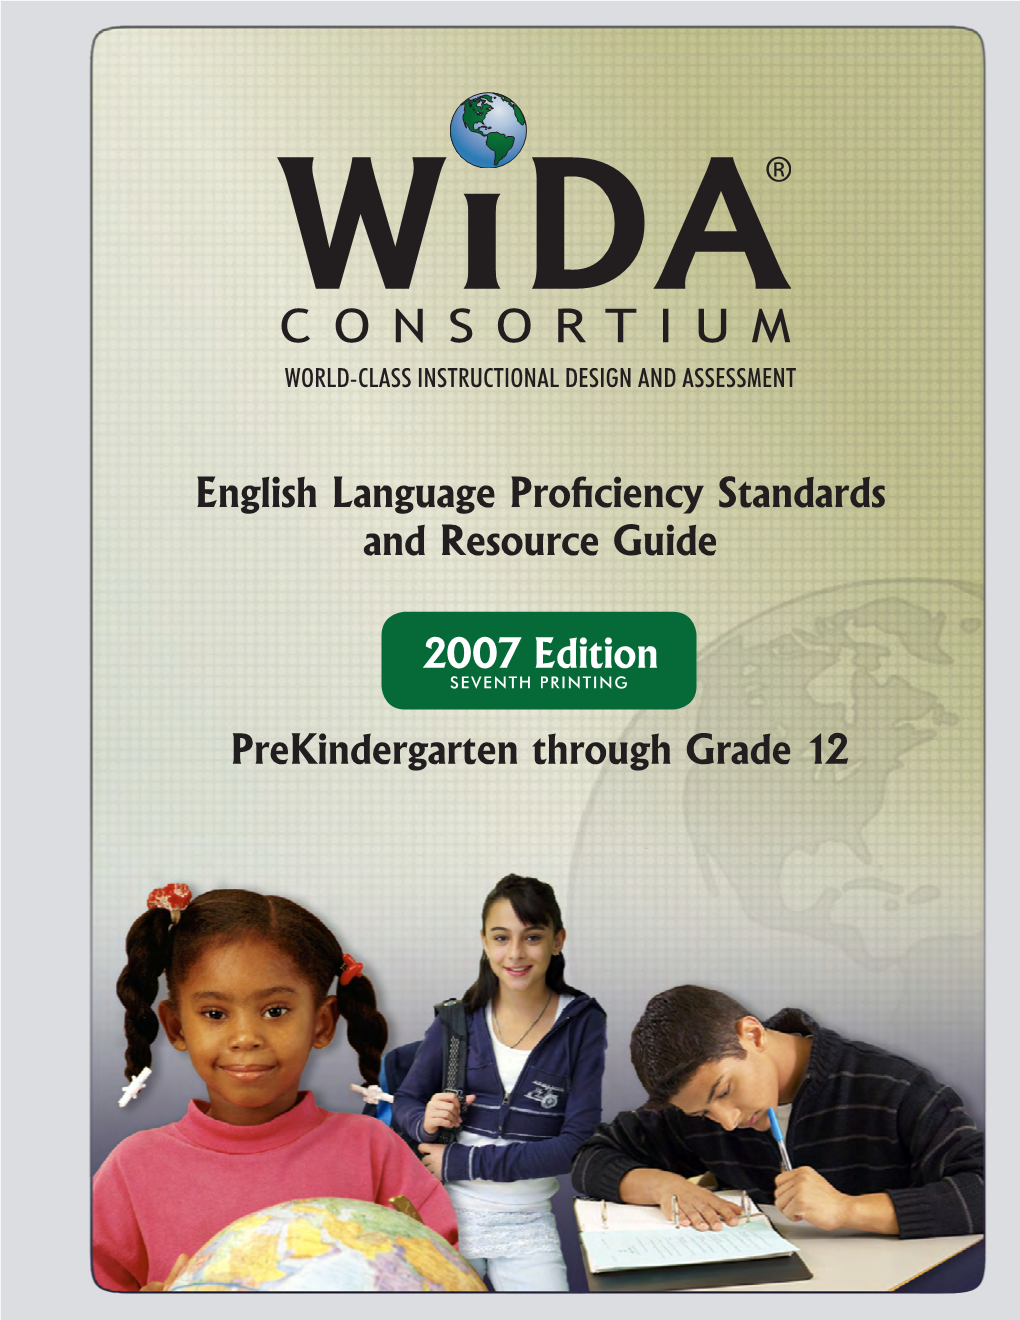 English Language Proficiency Standards and Resource Guide